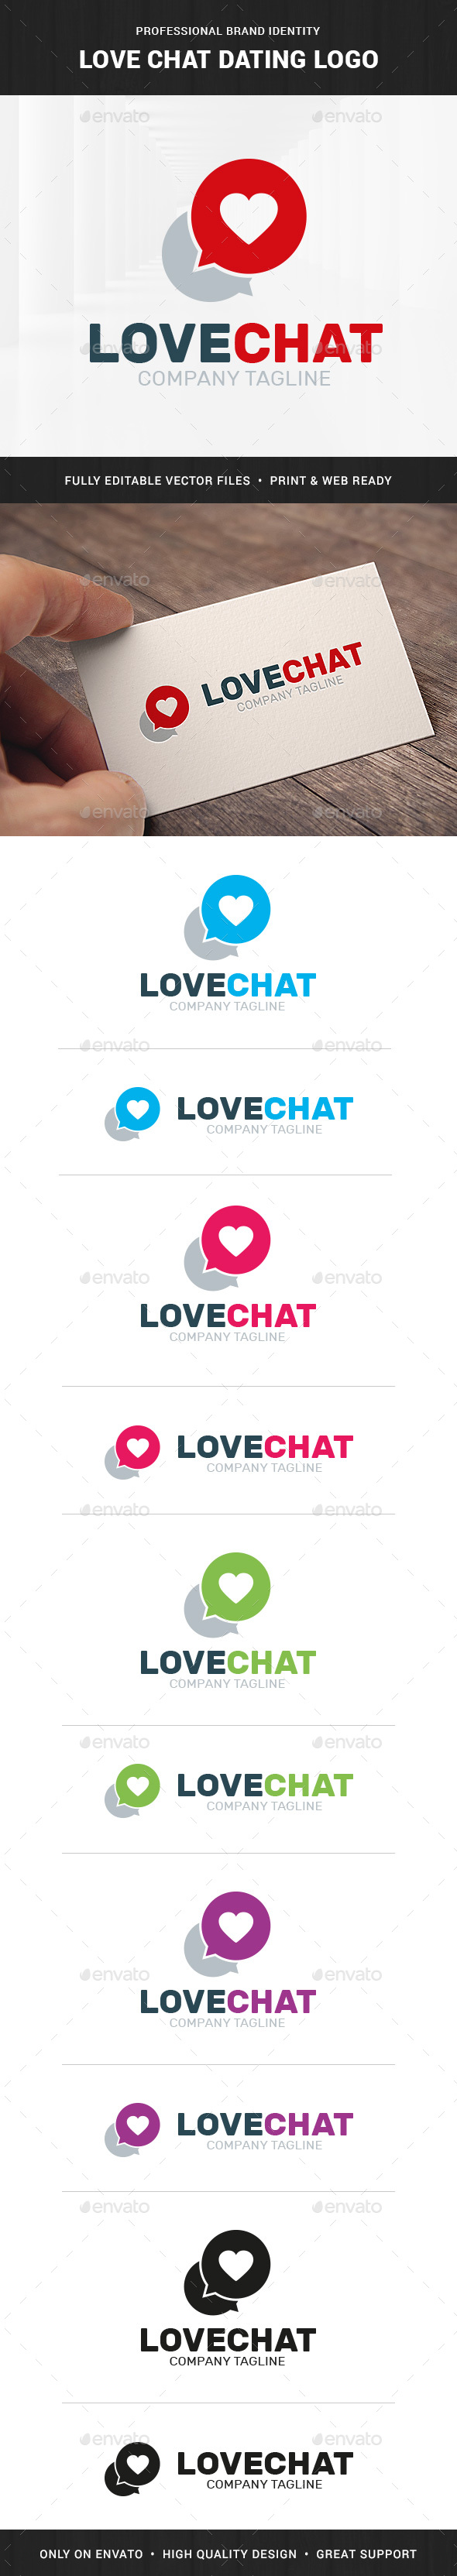 Love Chat Dating Logo Template